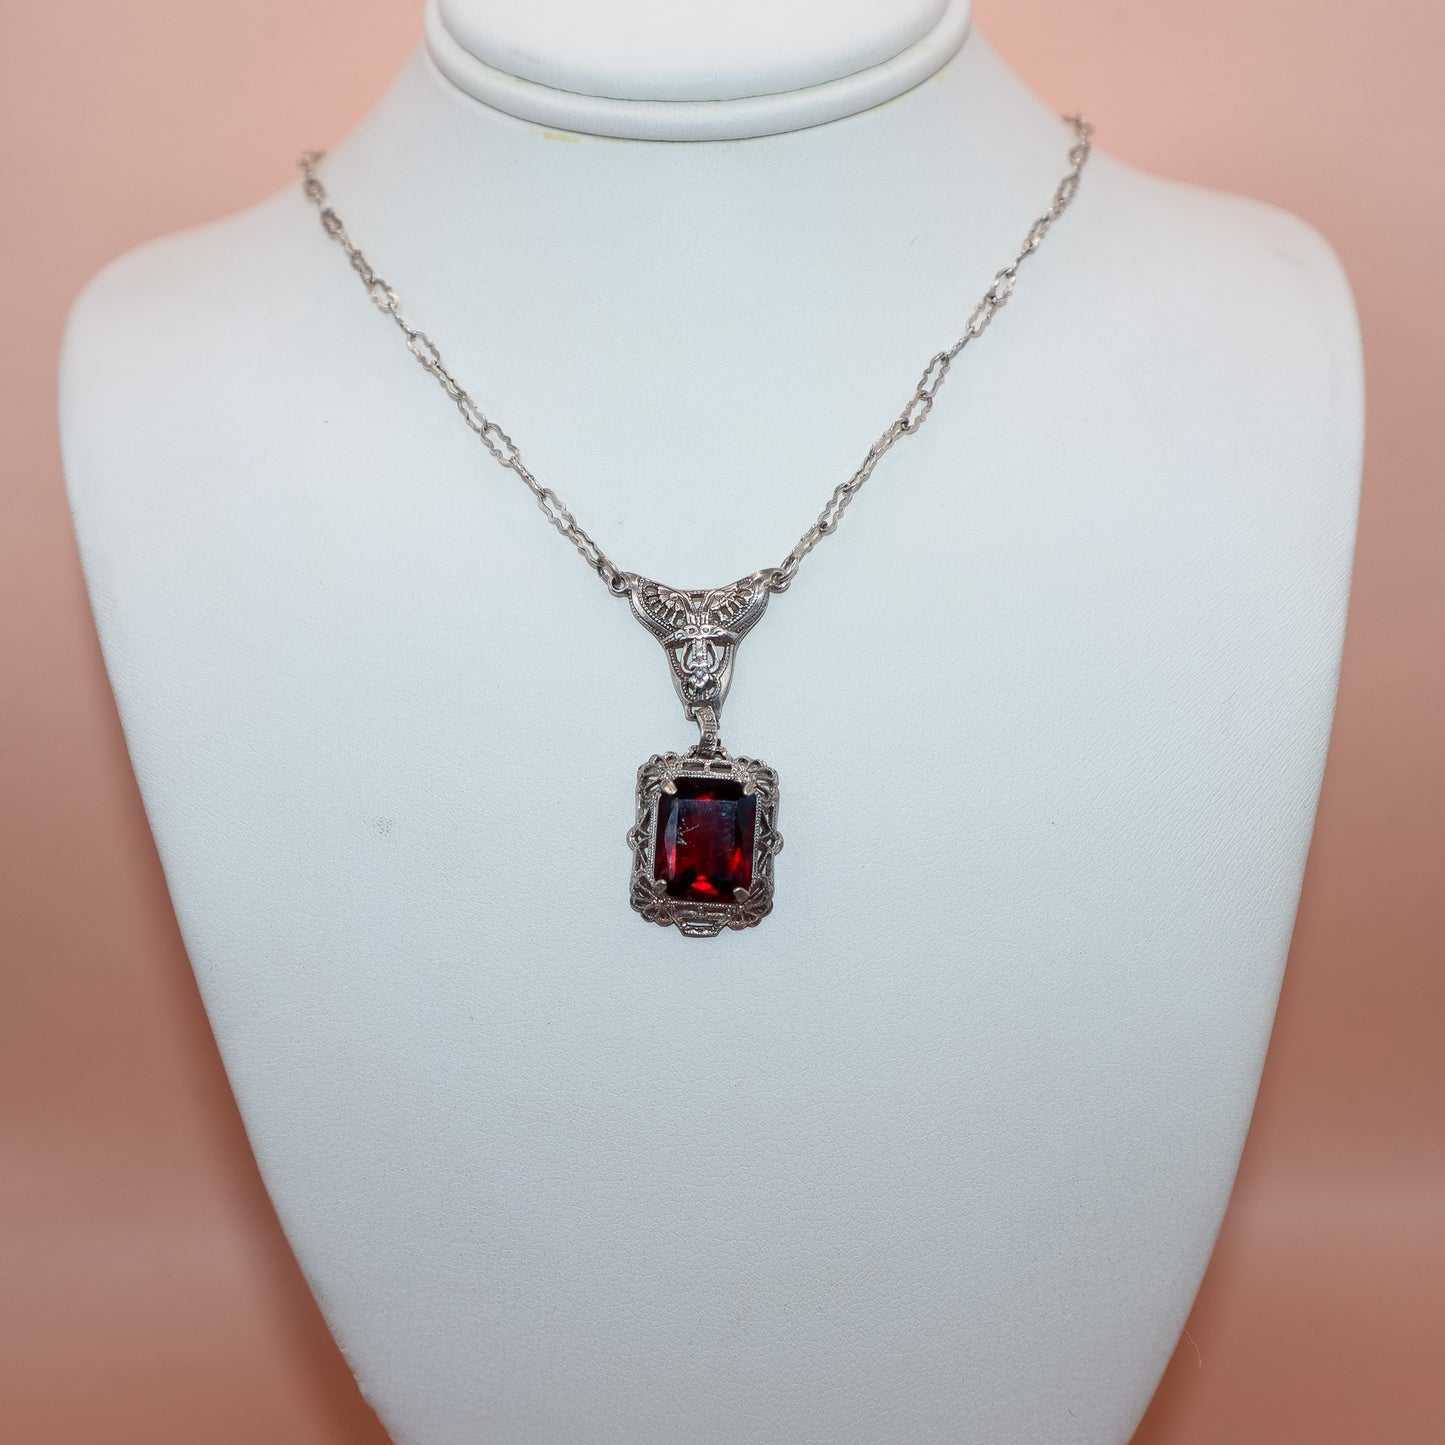 Vintage Art Deco Sterling Silver Filigree Necklace with Lab Ruby